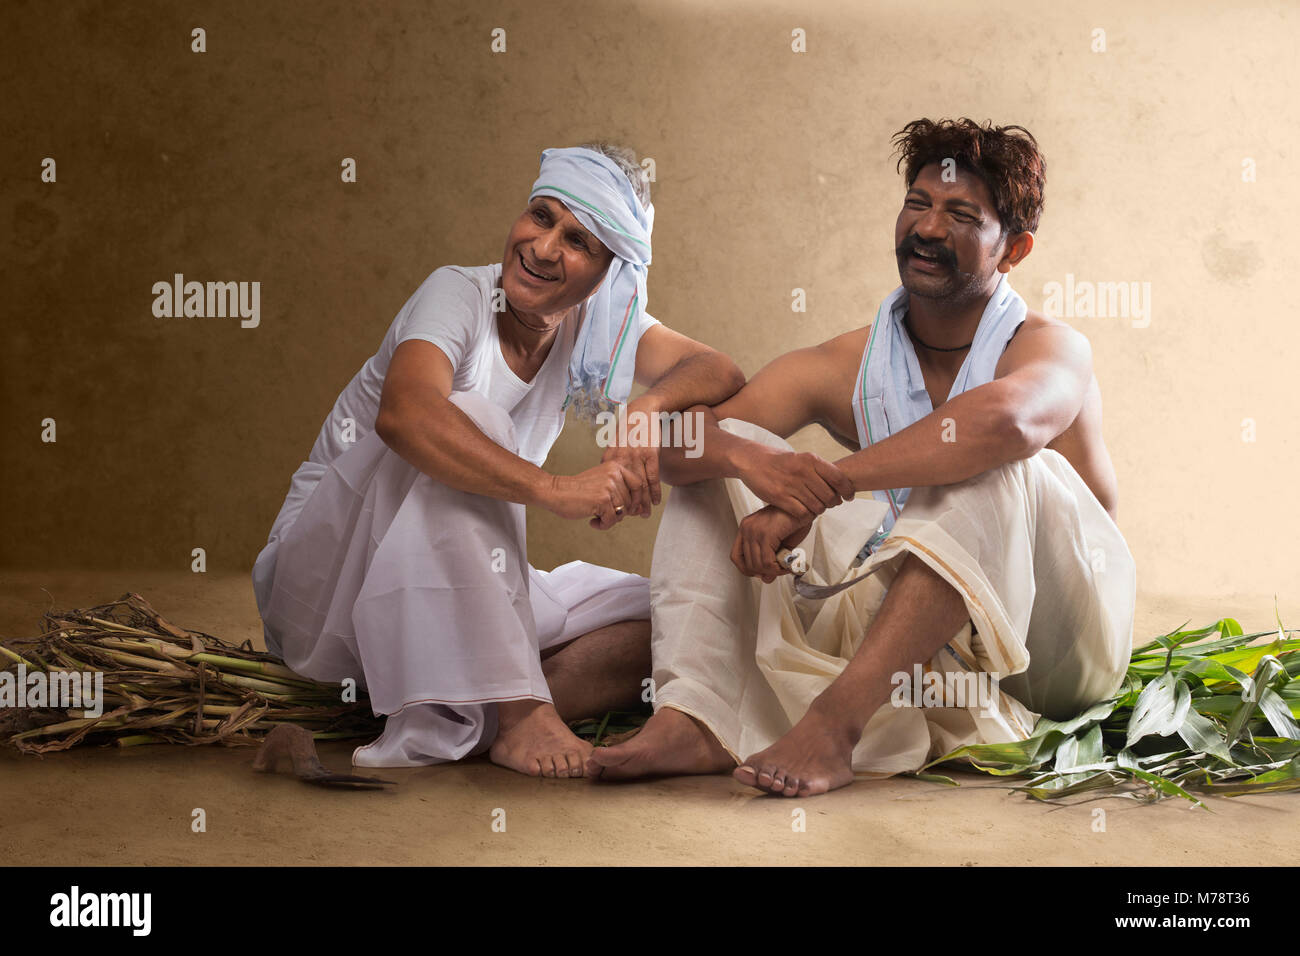 Two smiling  Indian farmer sitting together Stock Photo